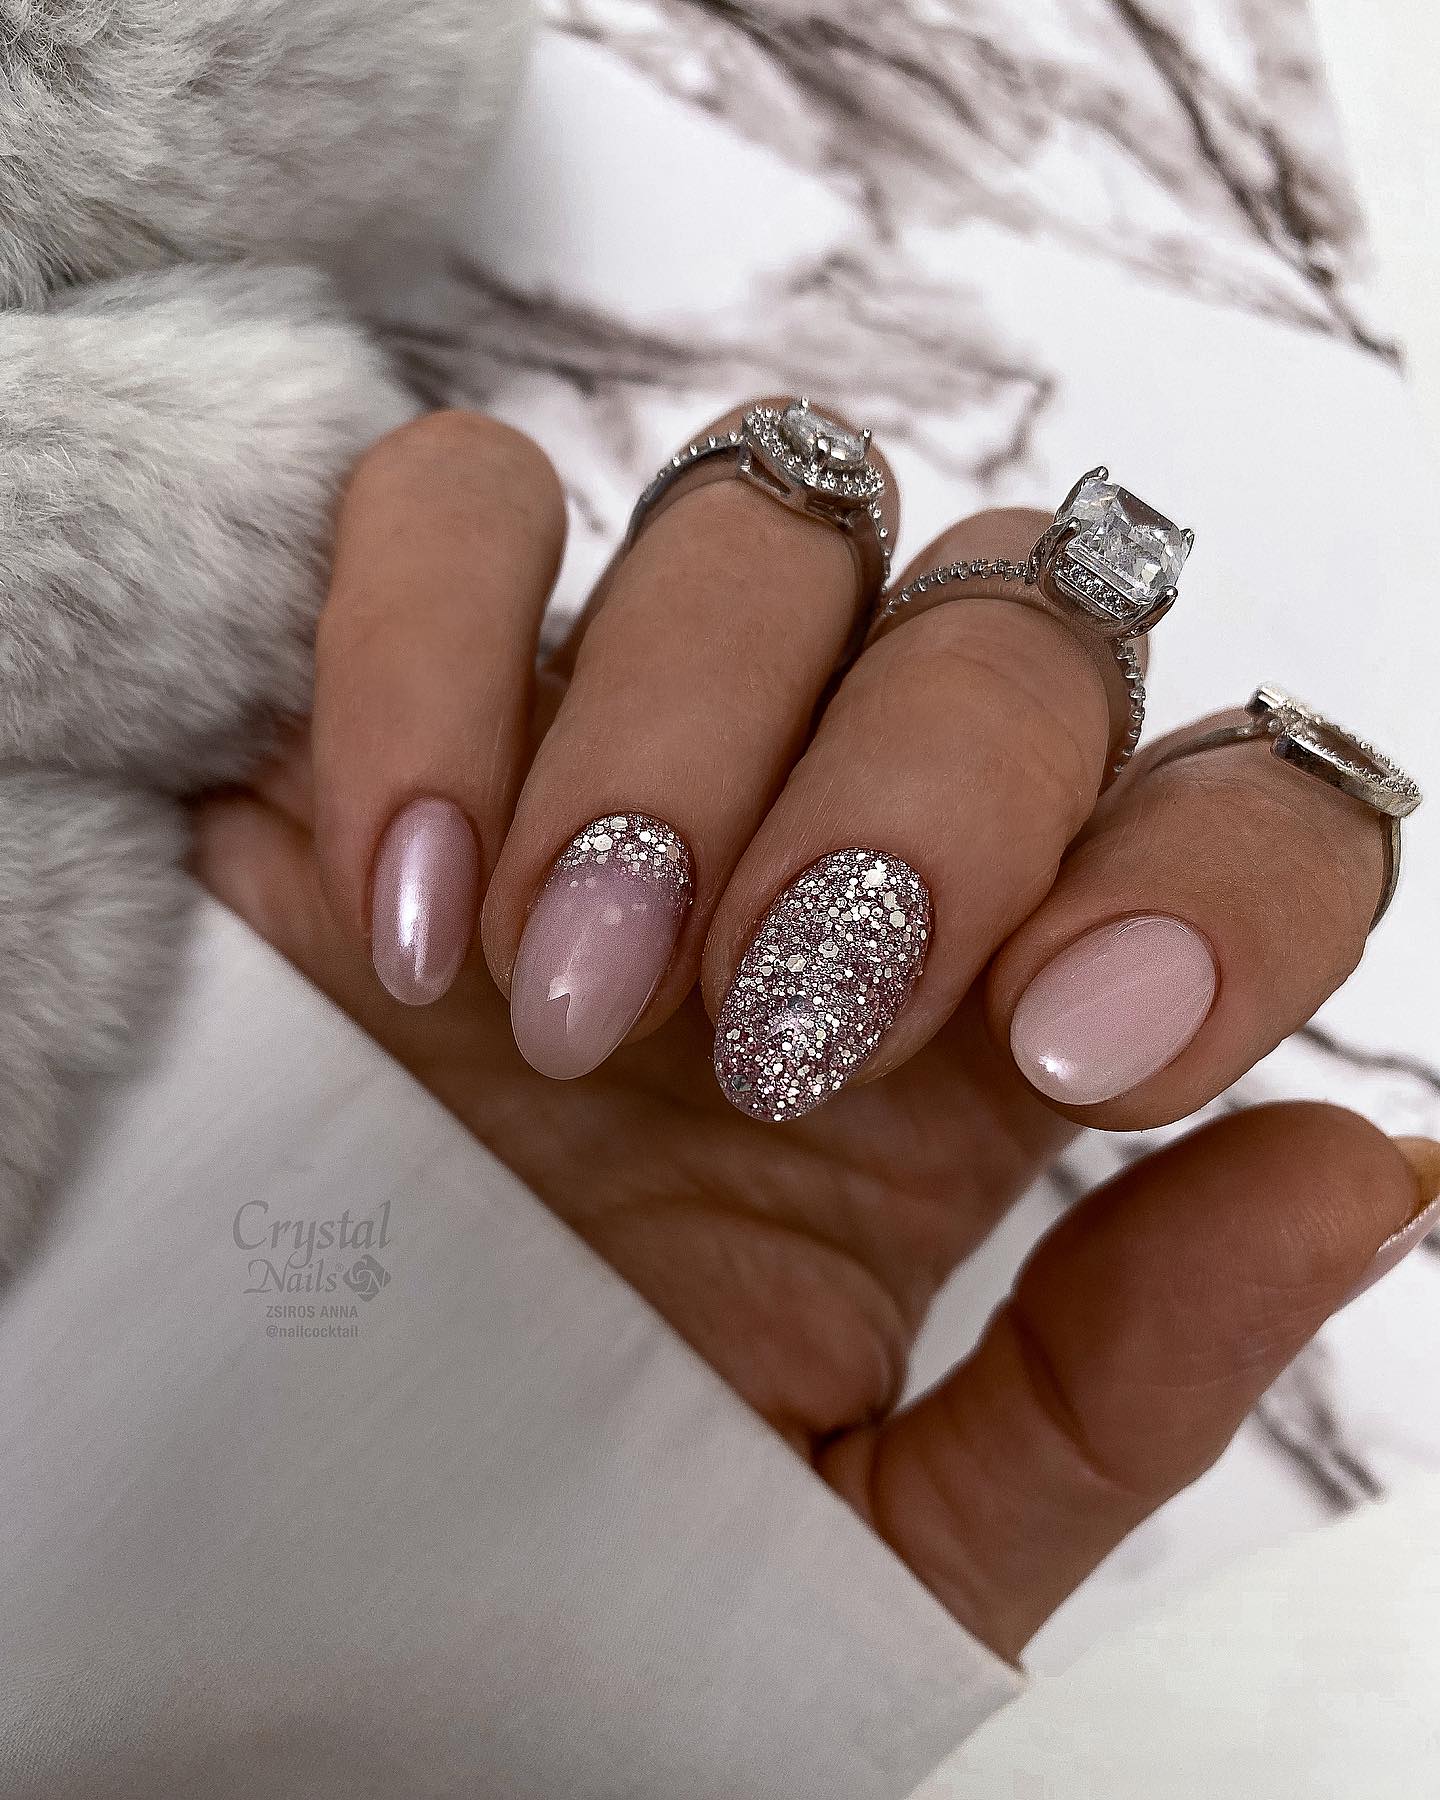 Short Nude Nails with Glitter